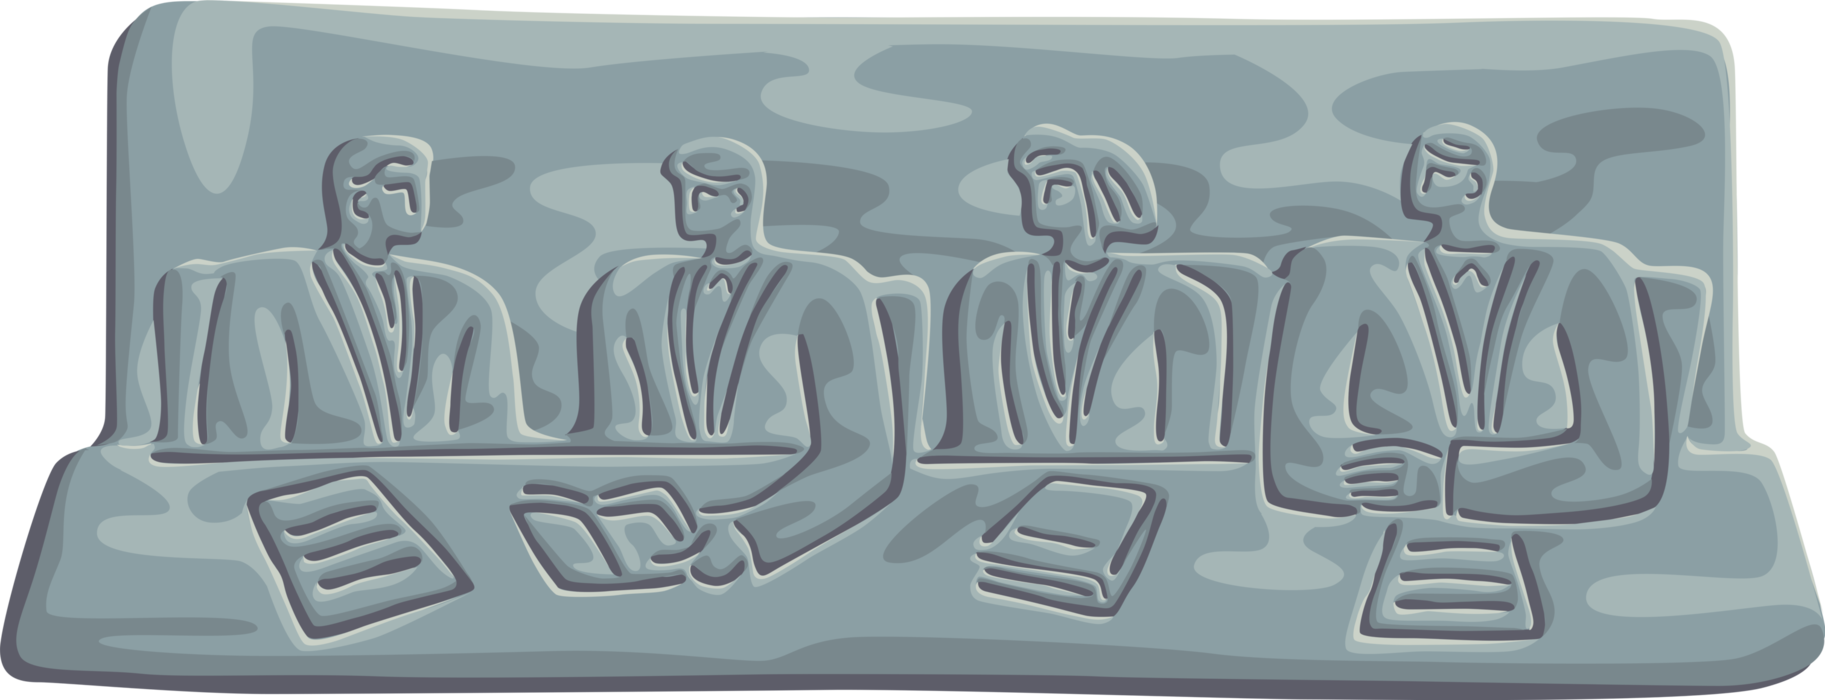 Vector Illustration of Business Associates in Office Boardroom Meeting Discussion